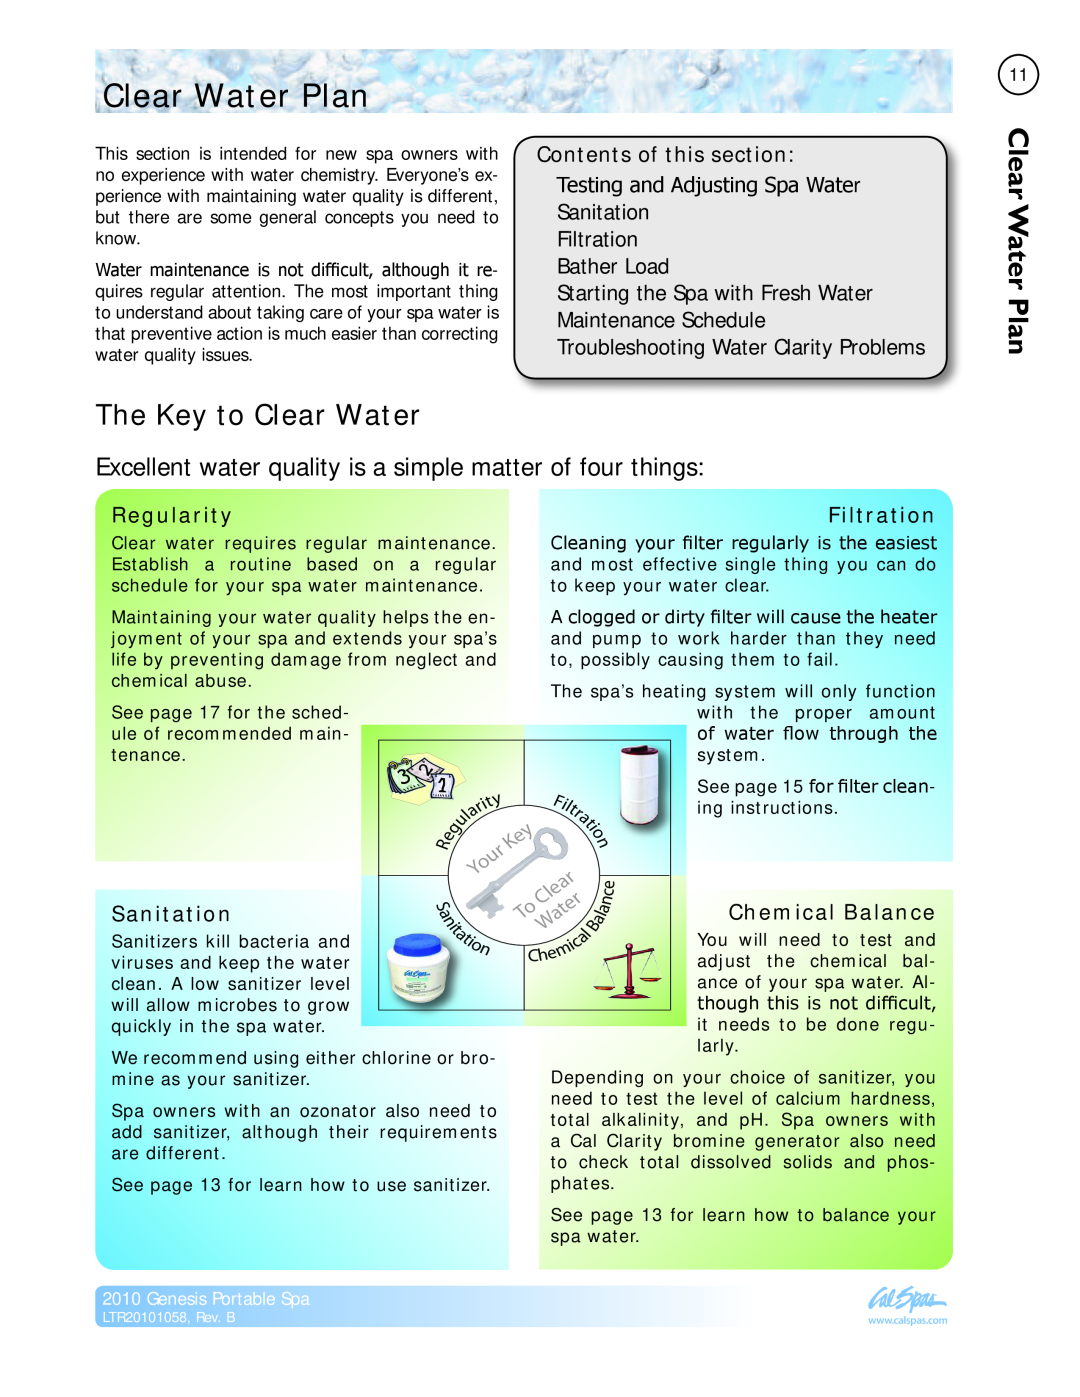 Cal Spas LTR20101058 manual Clear Water Plan, The Key to Clear Water 